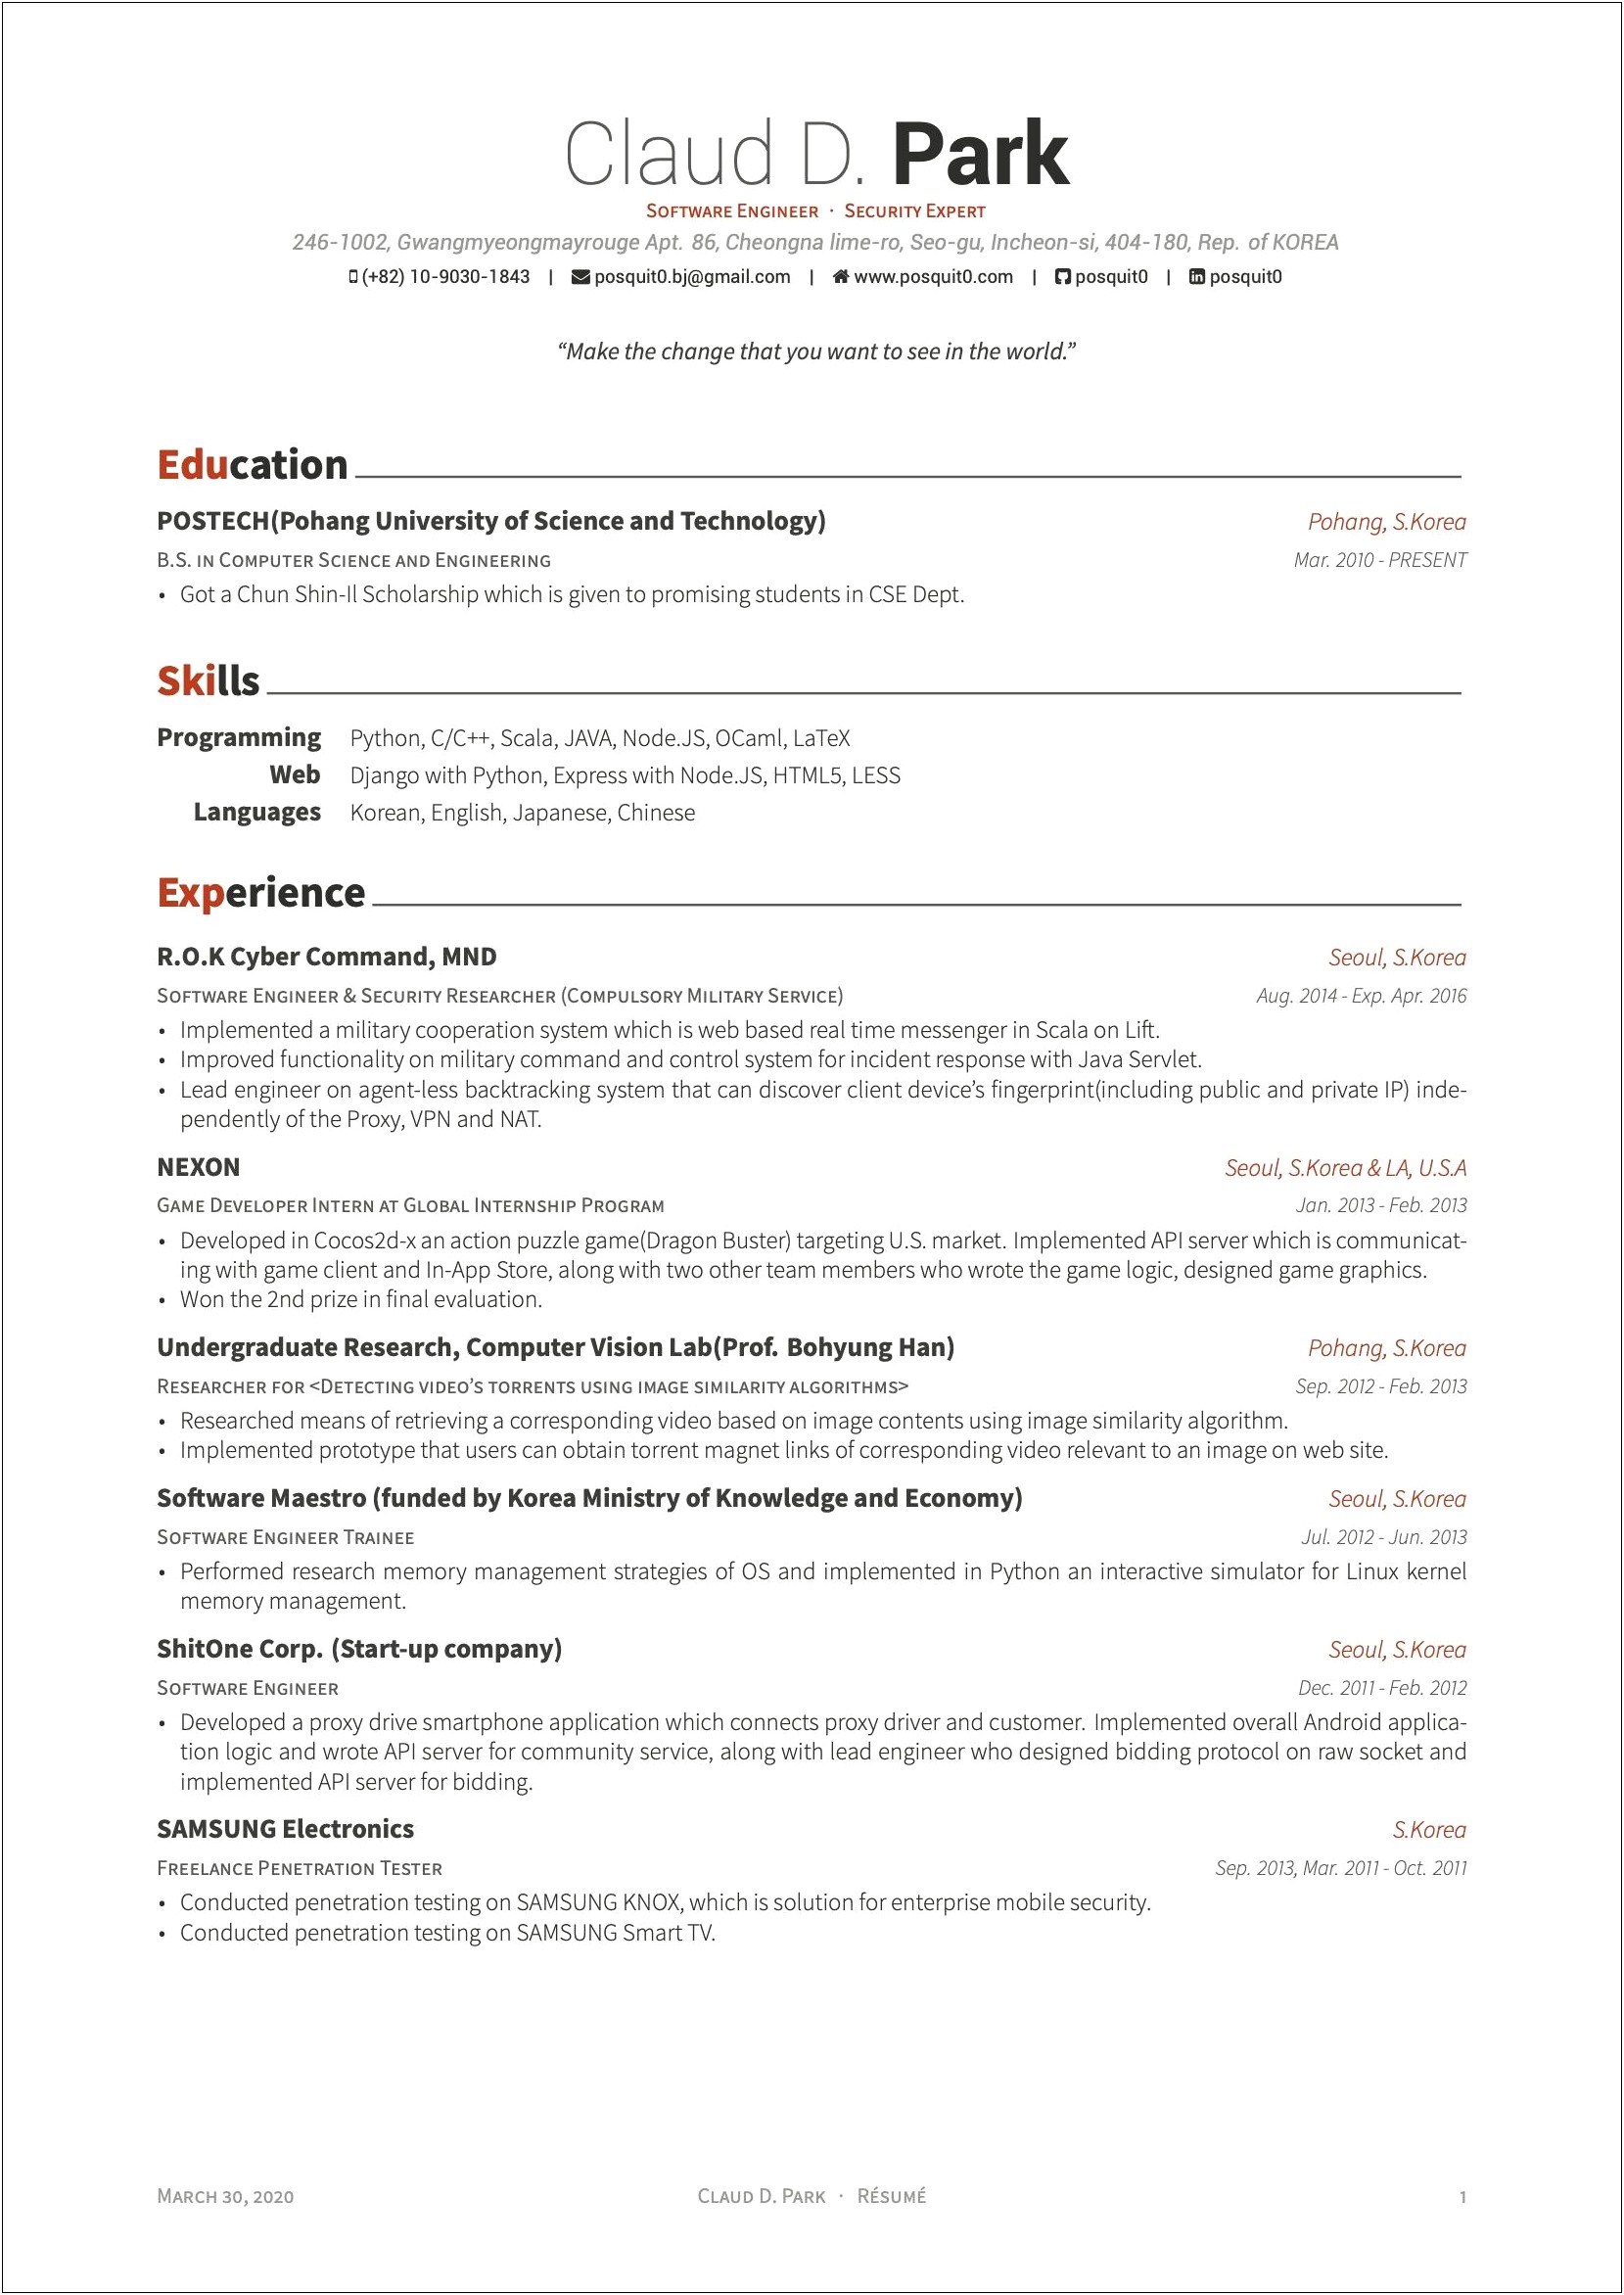 Resume Reference Personal Number Or Job Number